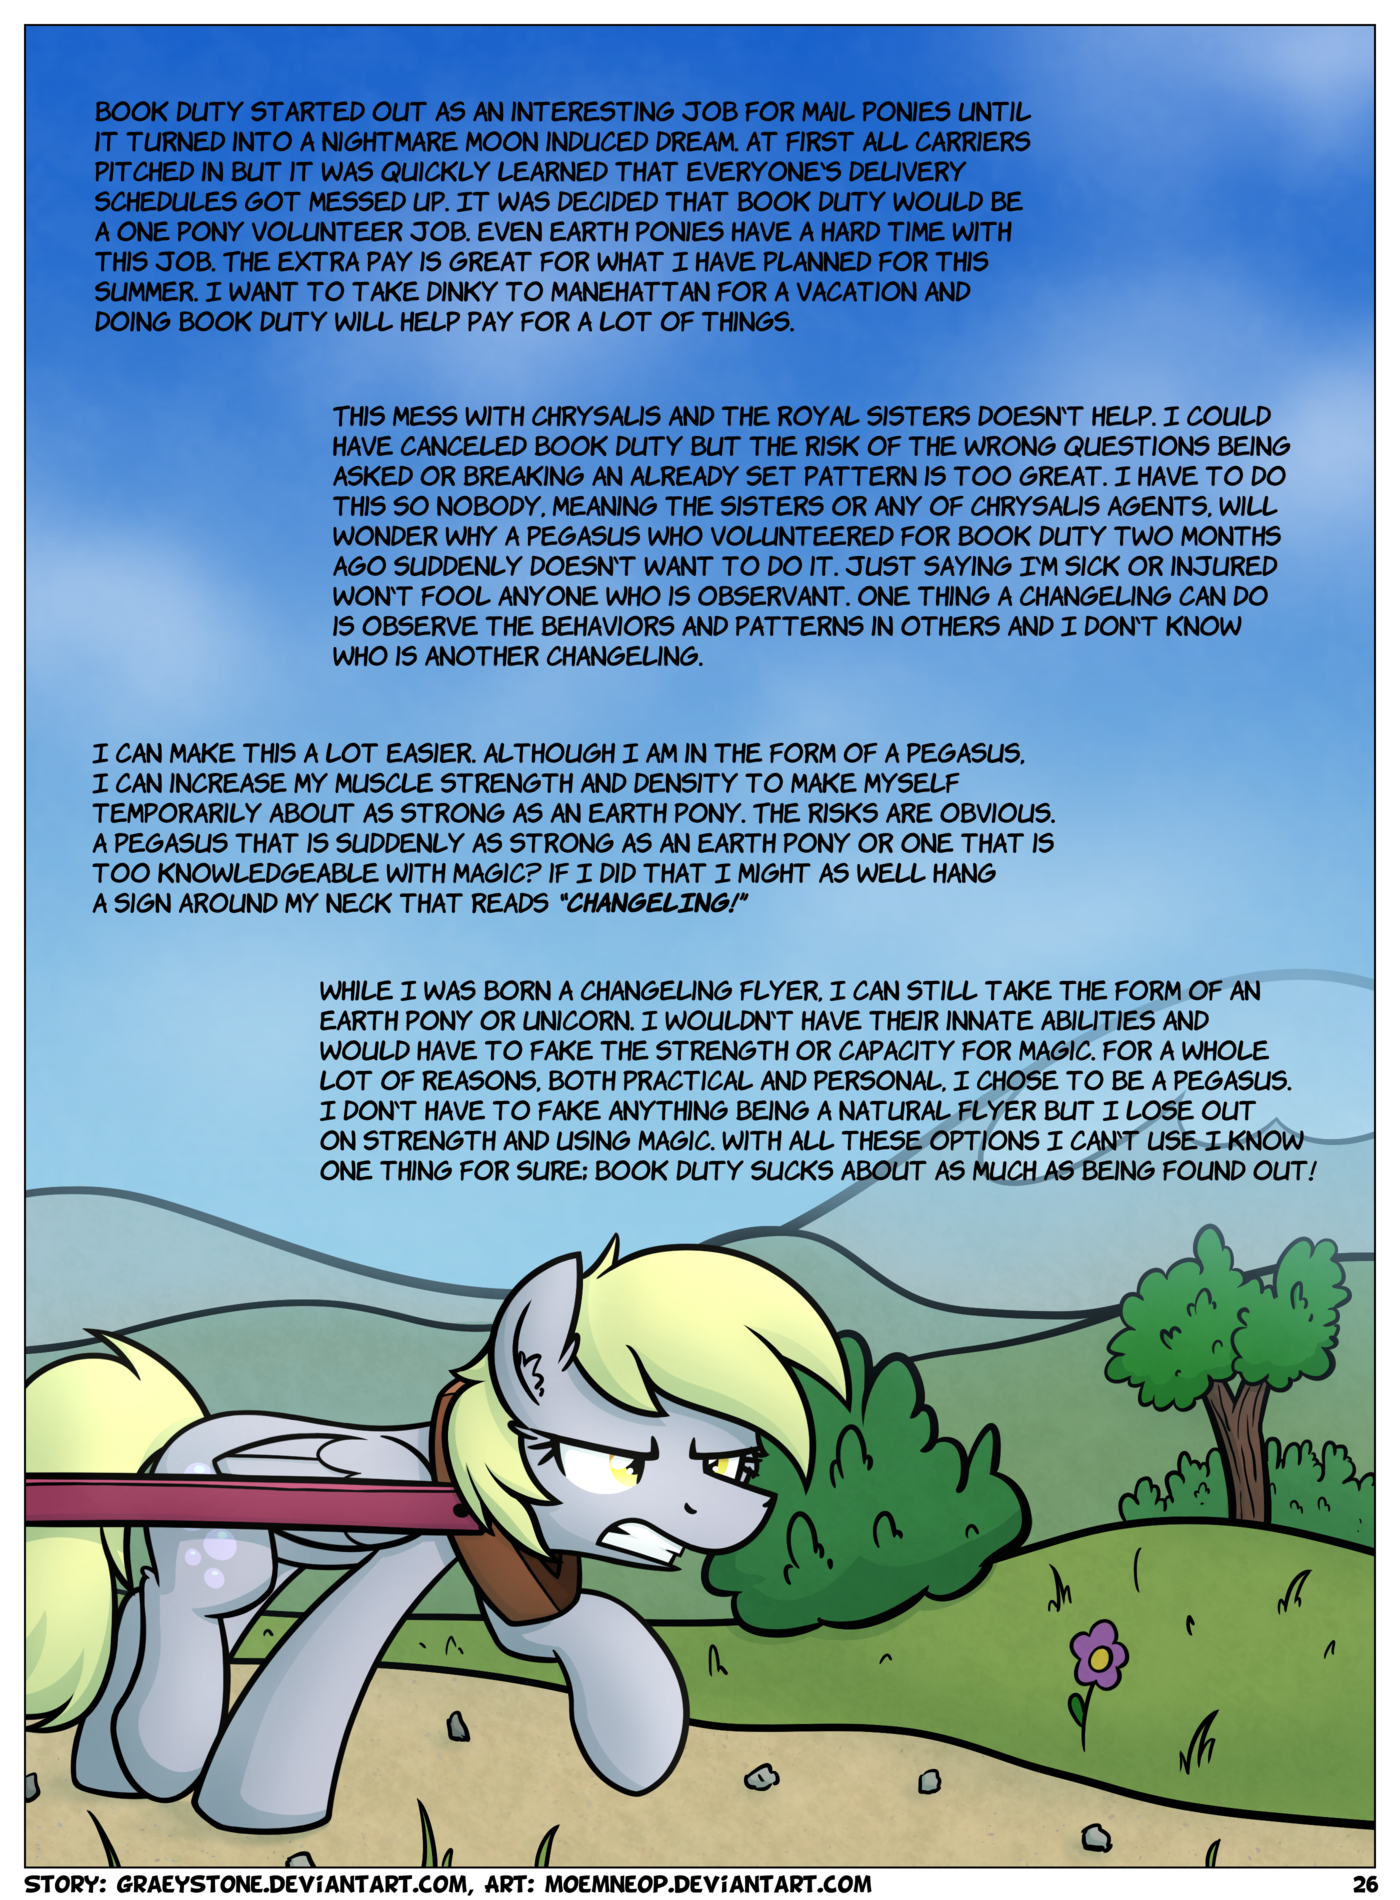 Shifting Changelings Lies and Truths 026 by moemneop on DeviantArt